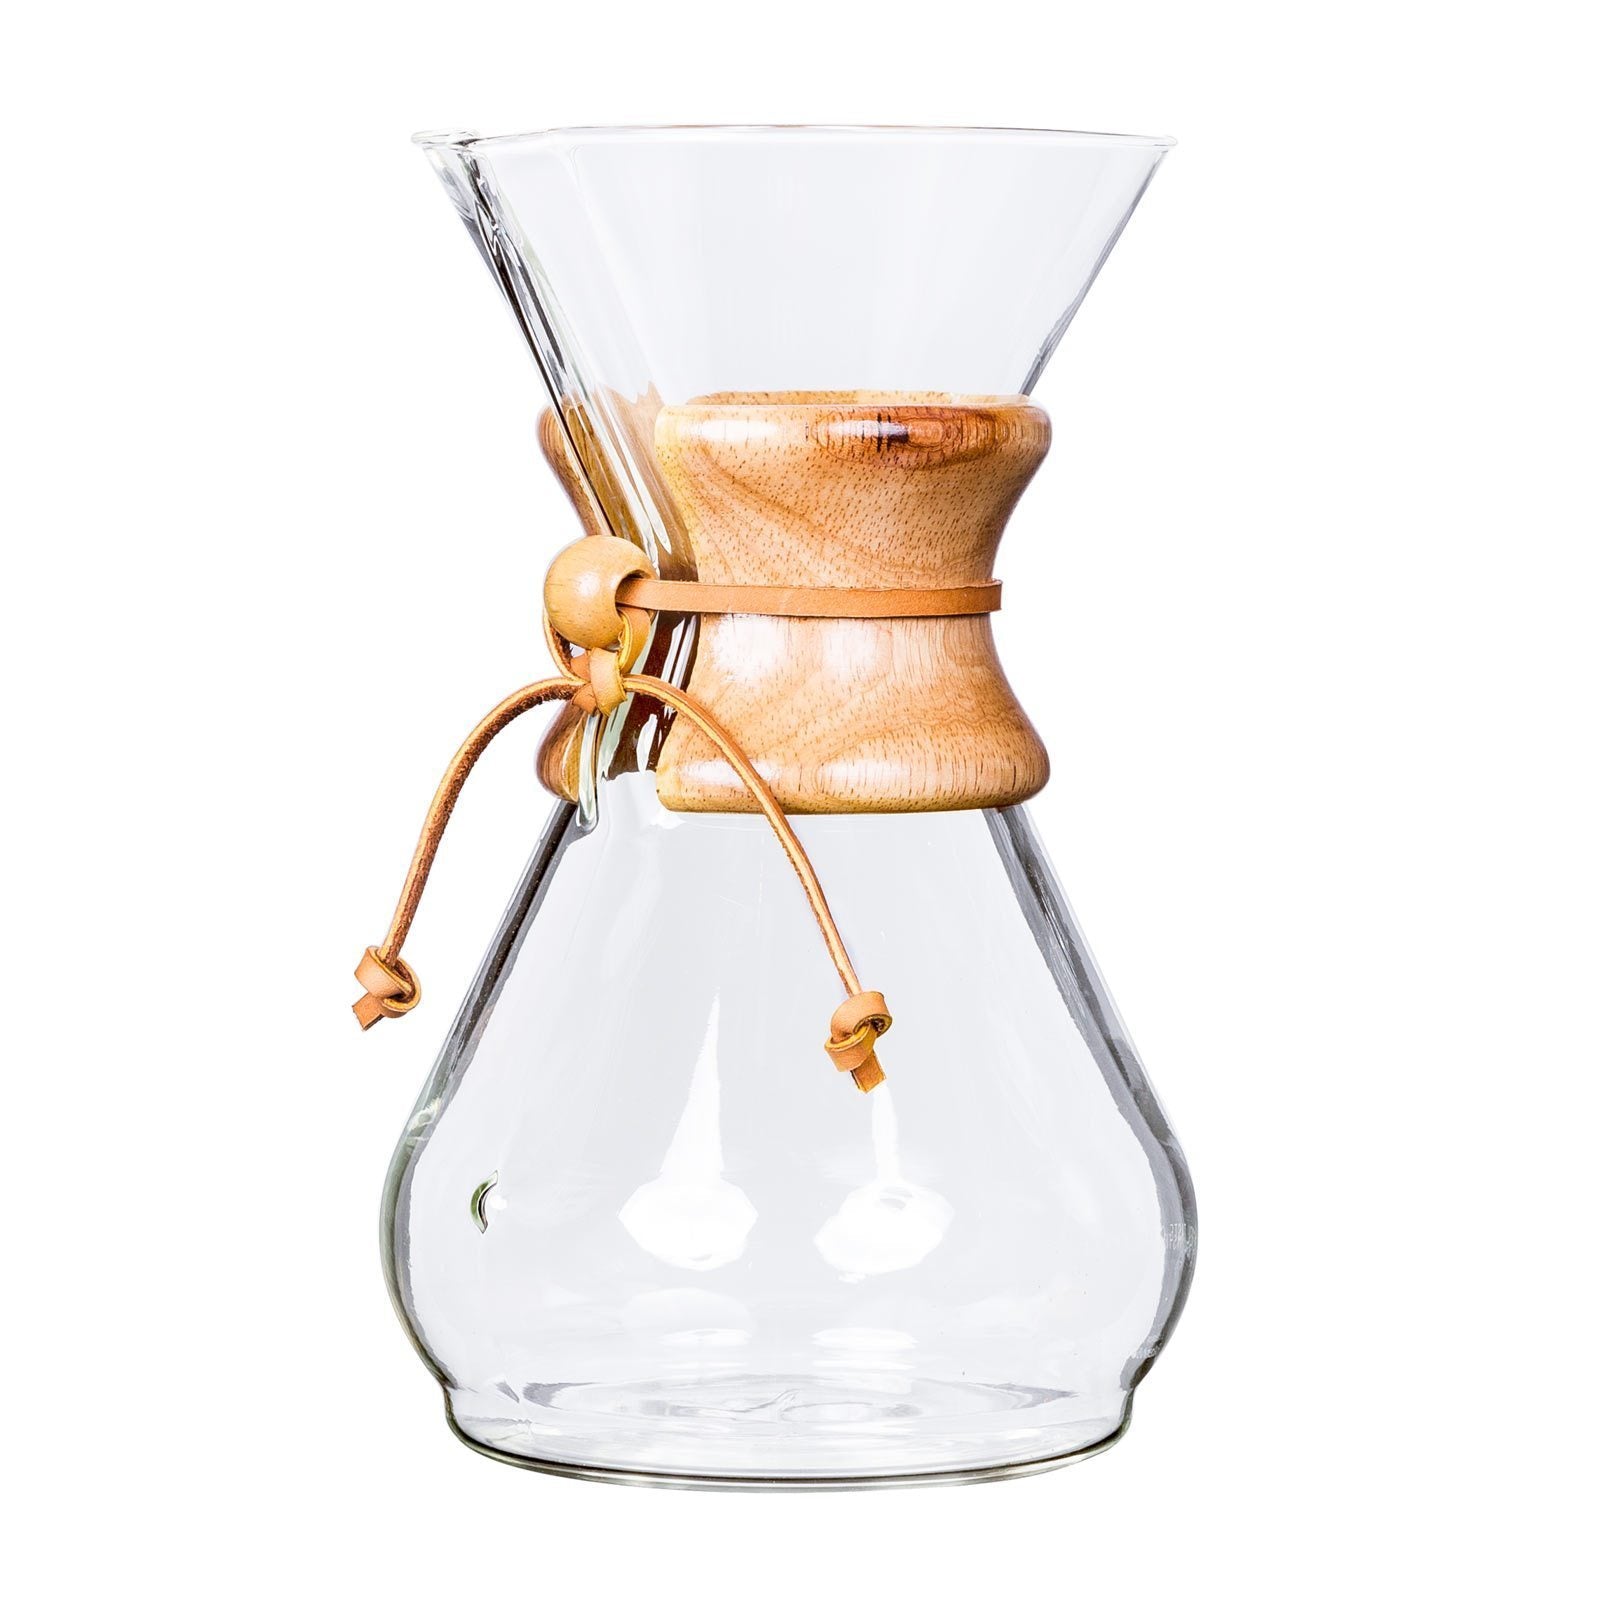 Chemex 3-Cup Glass Pour-Over Coffee Maker with Natural Wood Collar